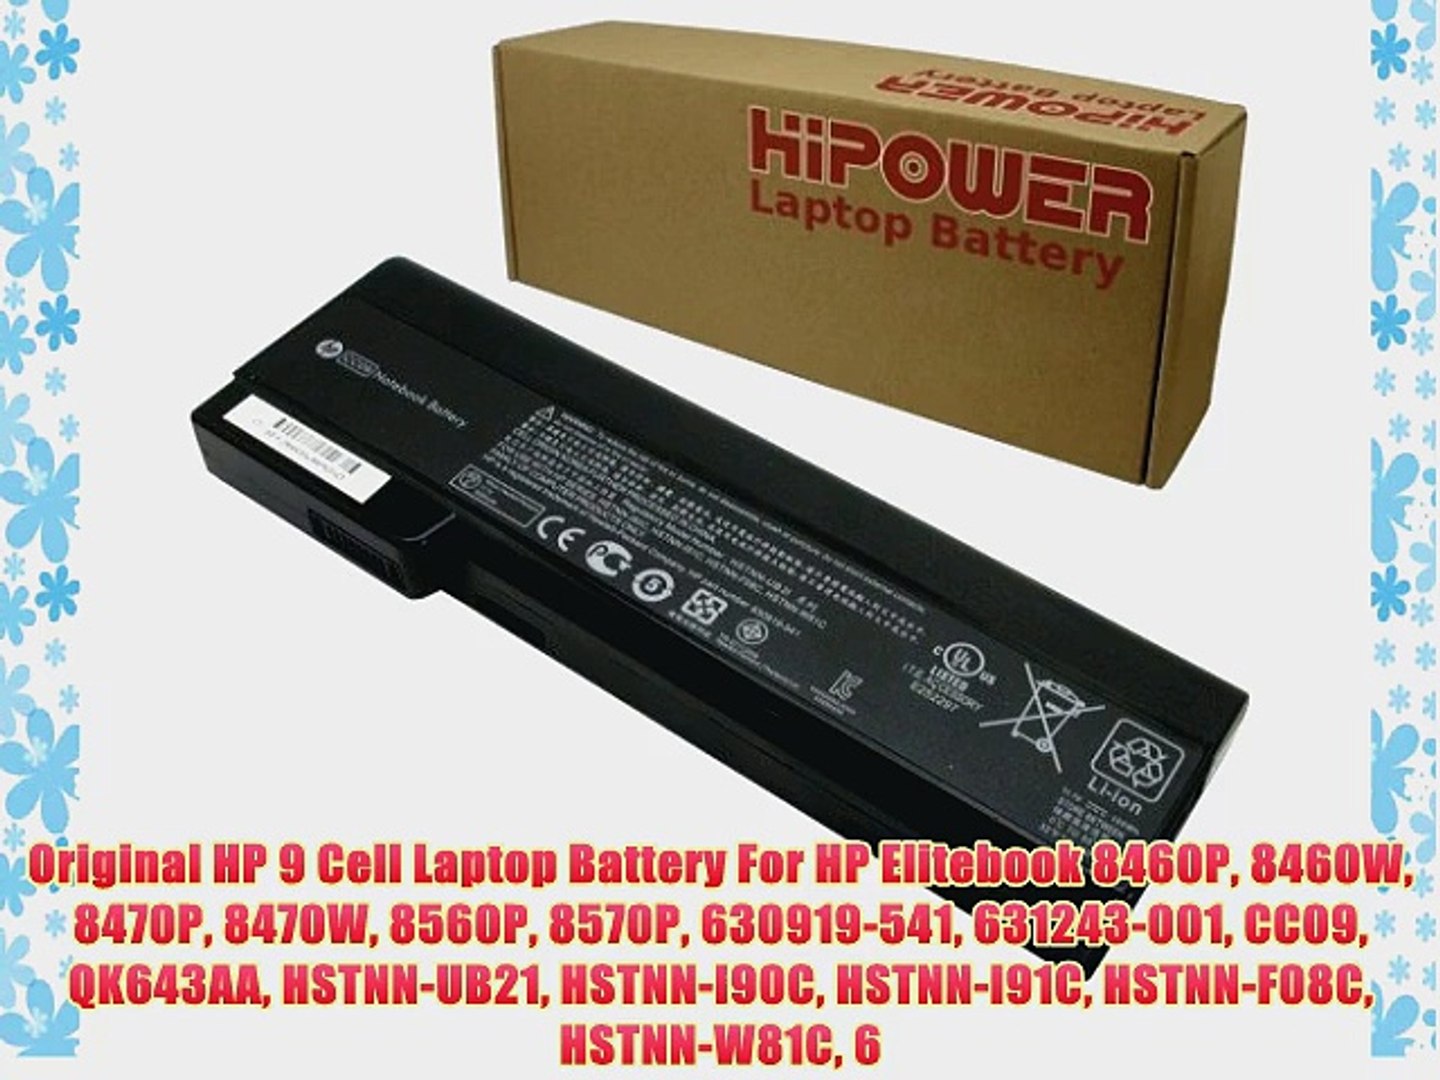 Original HP 9 Cell Laptop Battery For HP Elitebook 8460P 8460W 8470P 8470W  8560P 8570P 630919-541 - video Dailymotion